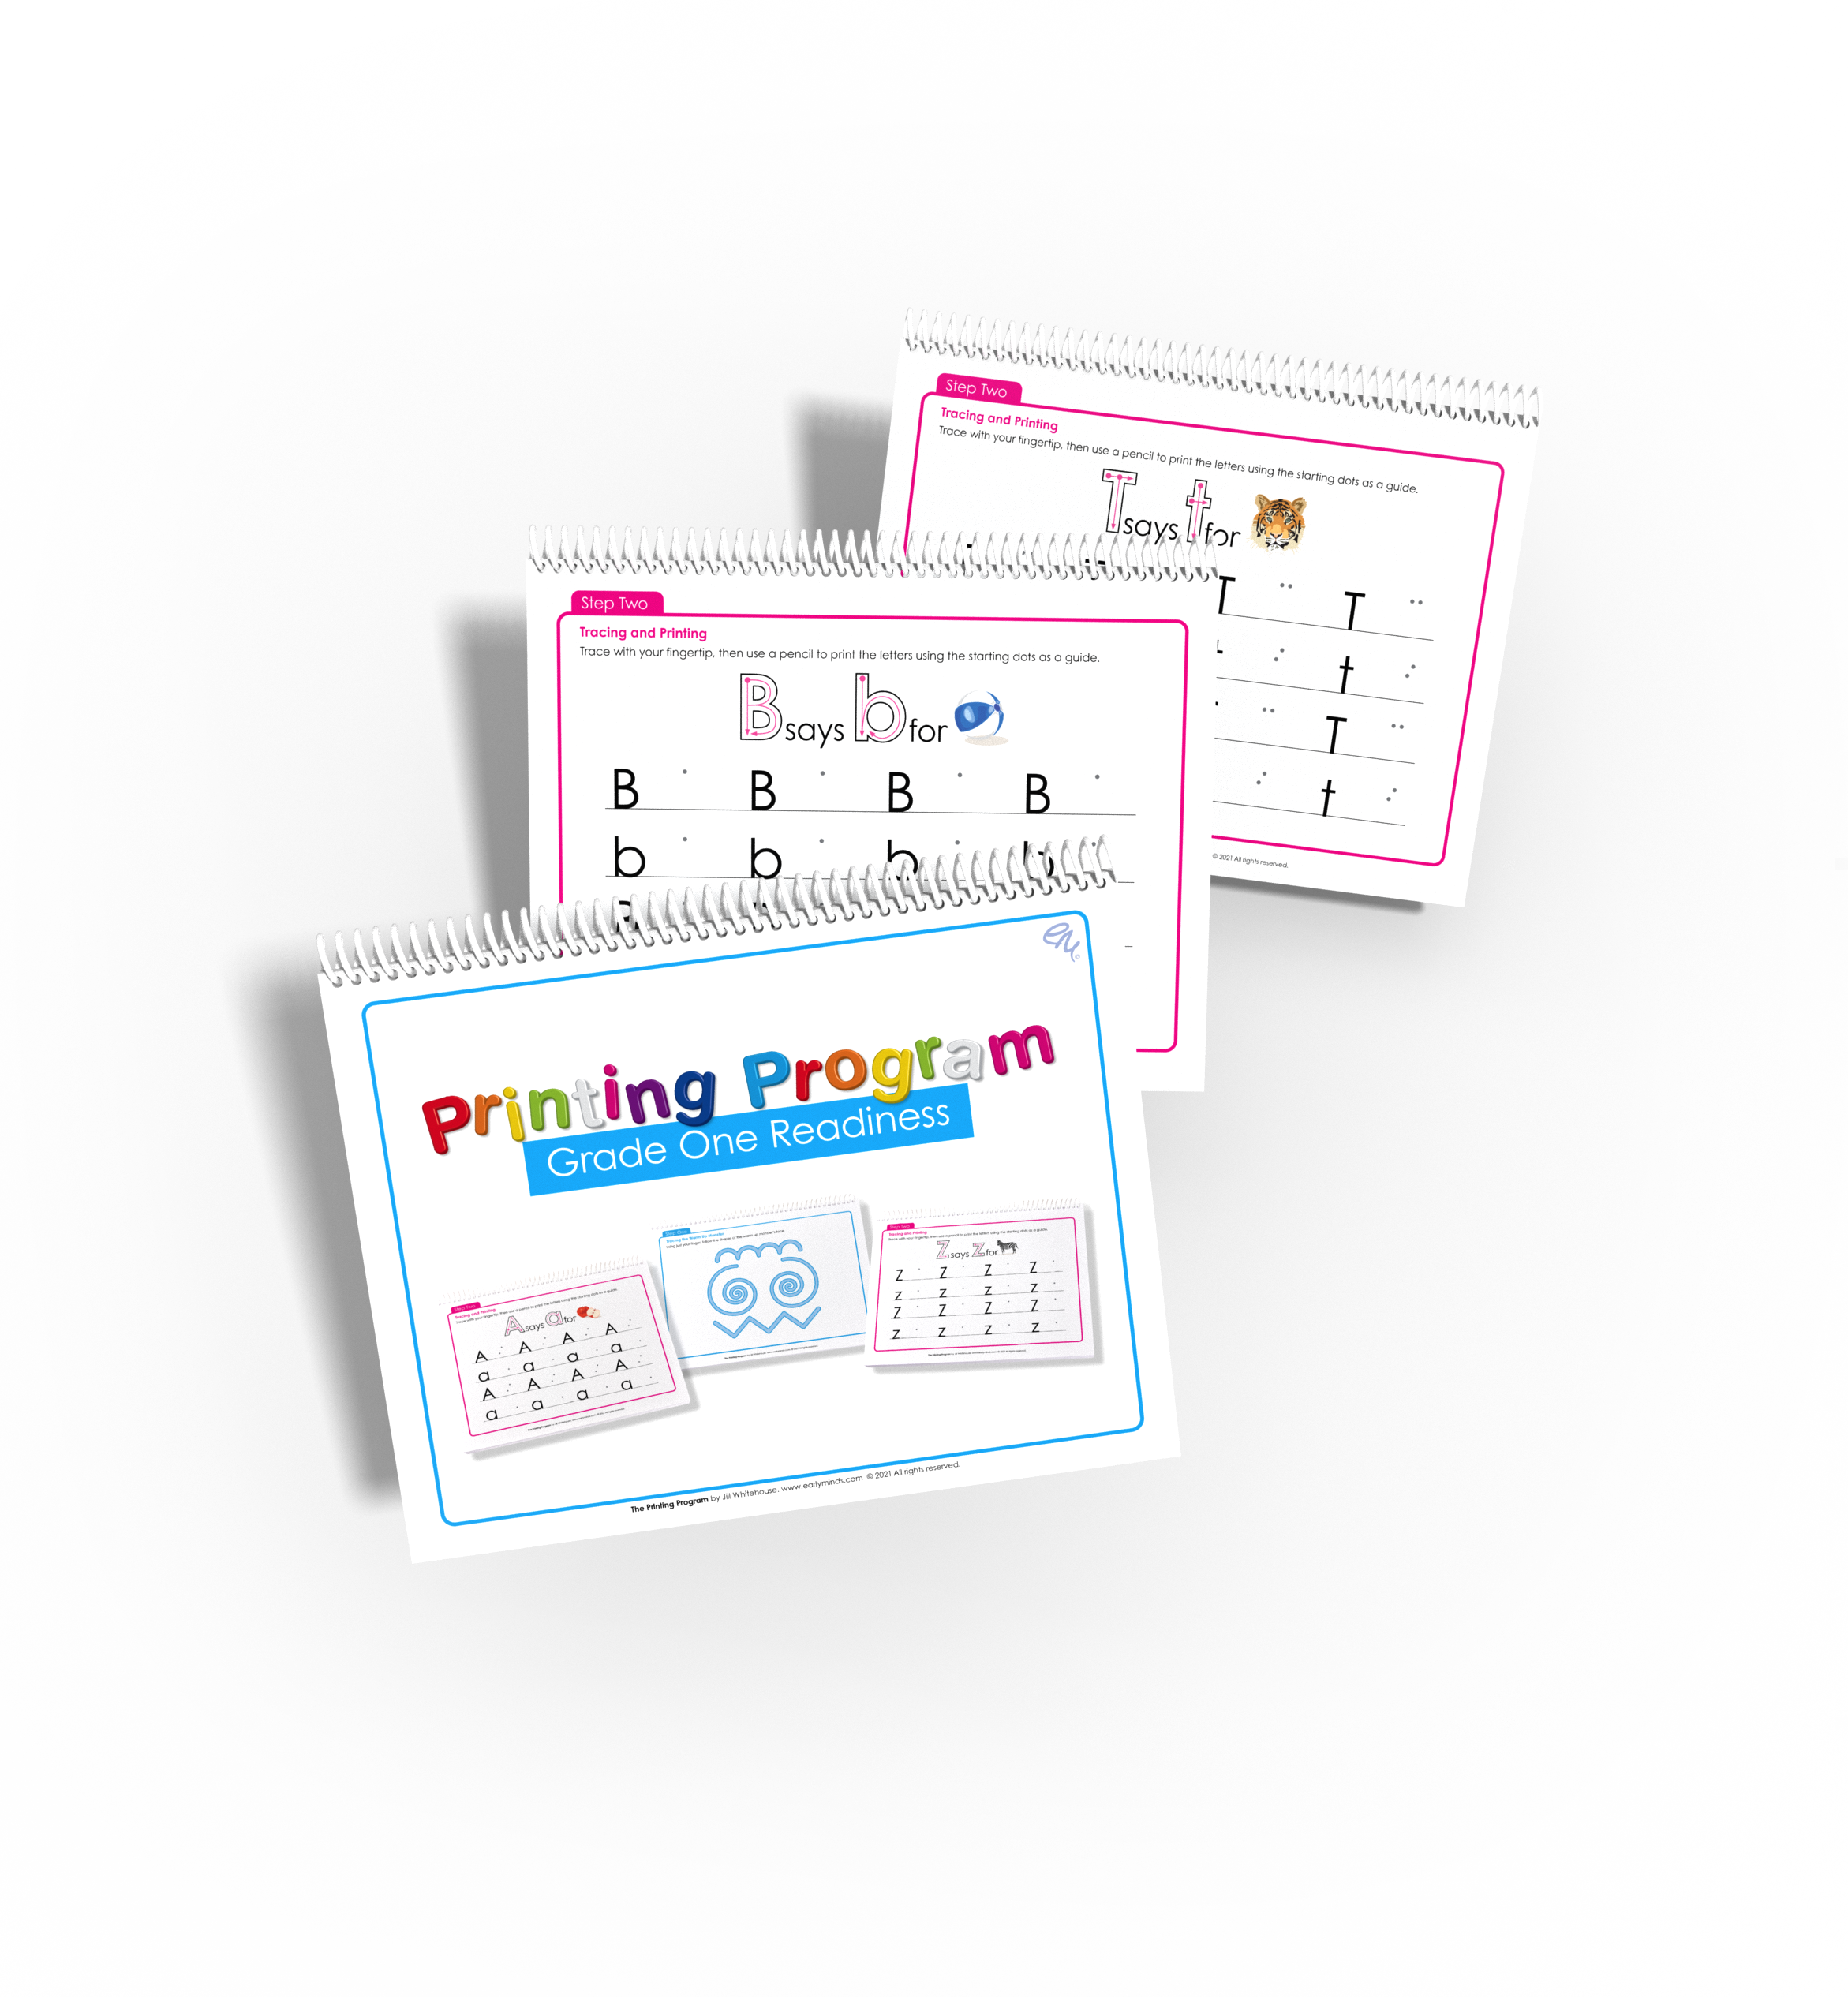 image of the Printing Program from the Grade One Readiness pack at earlyminds.com